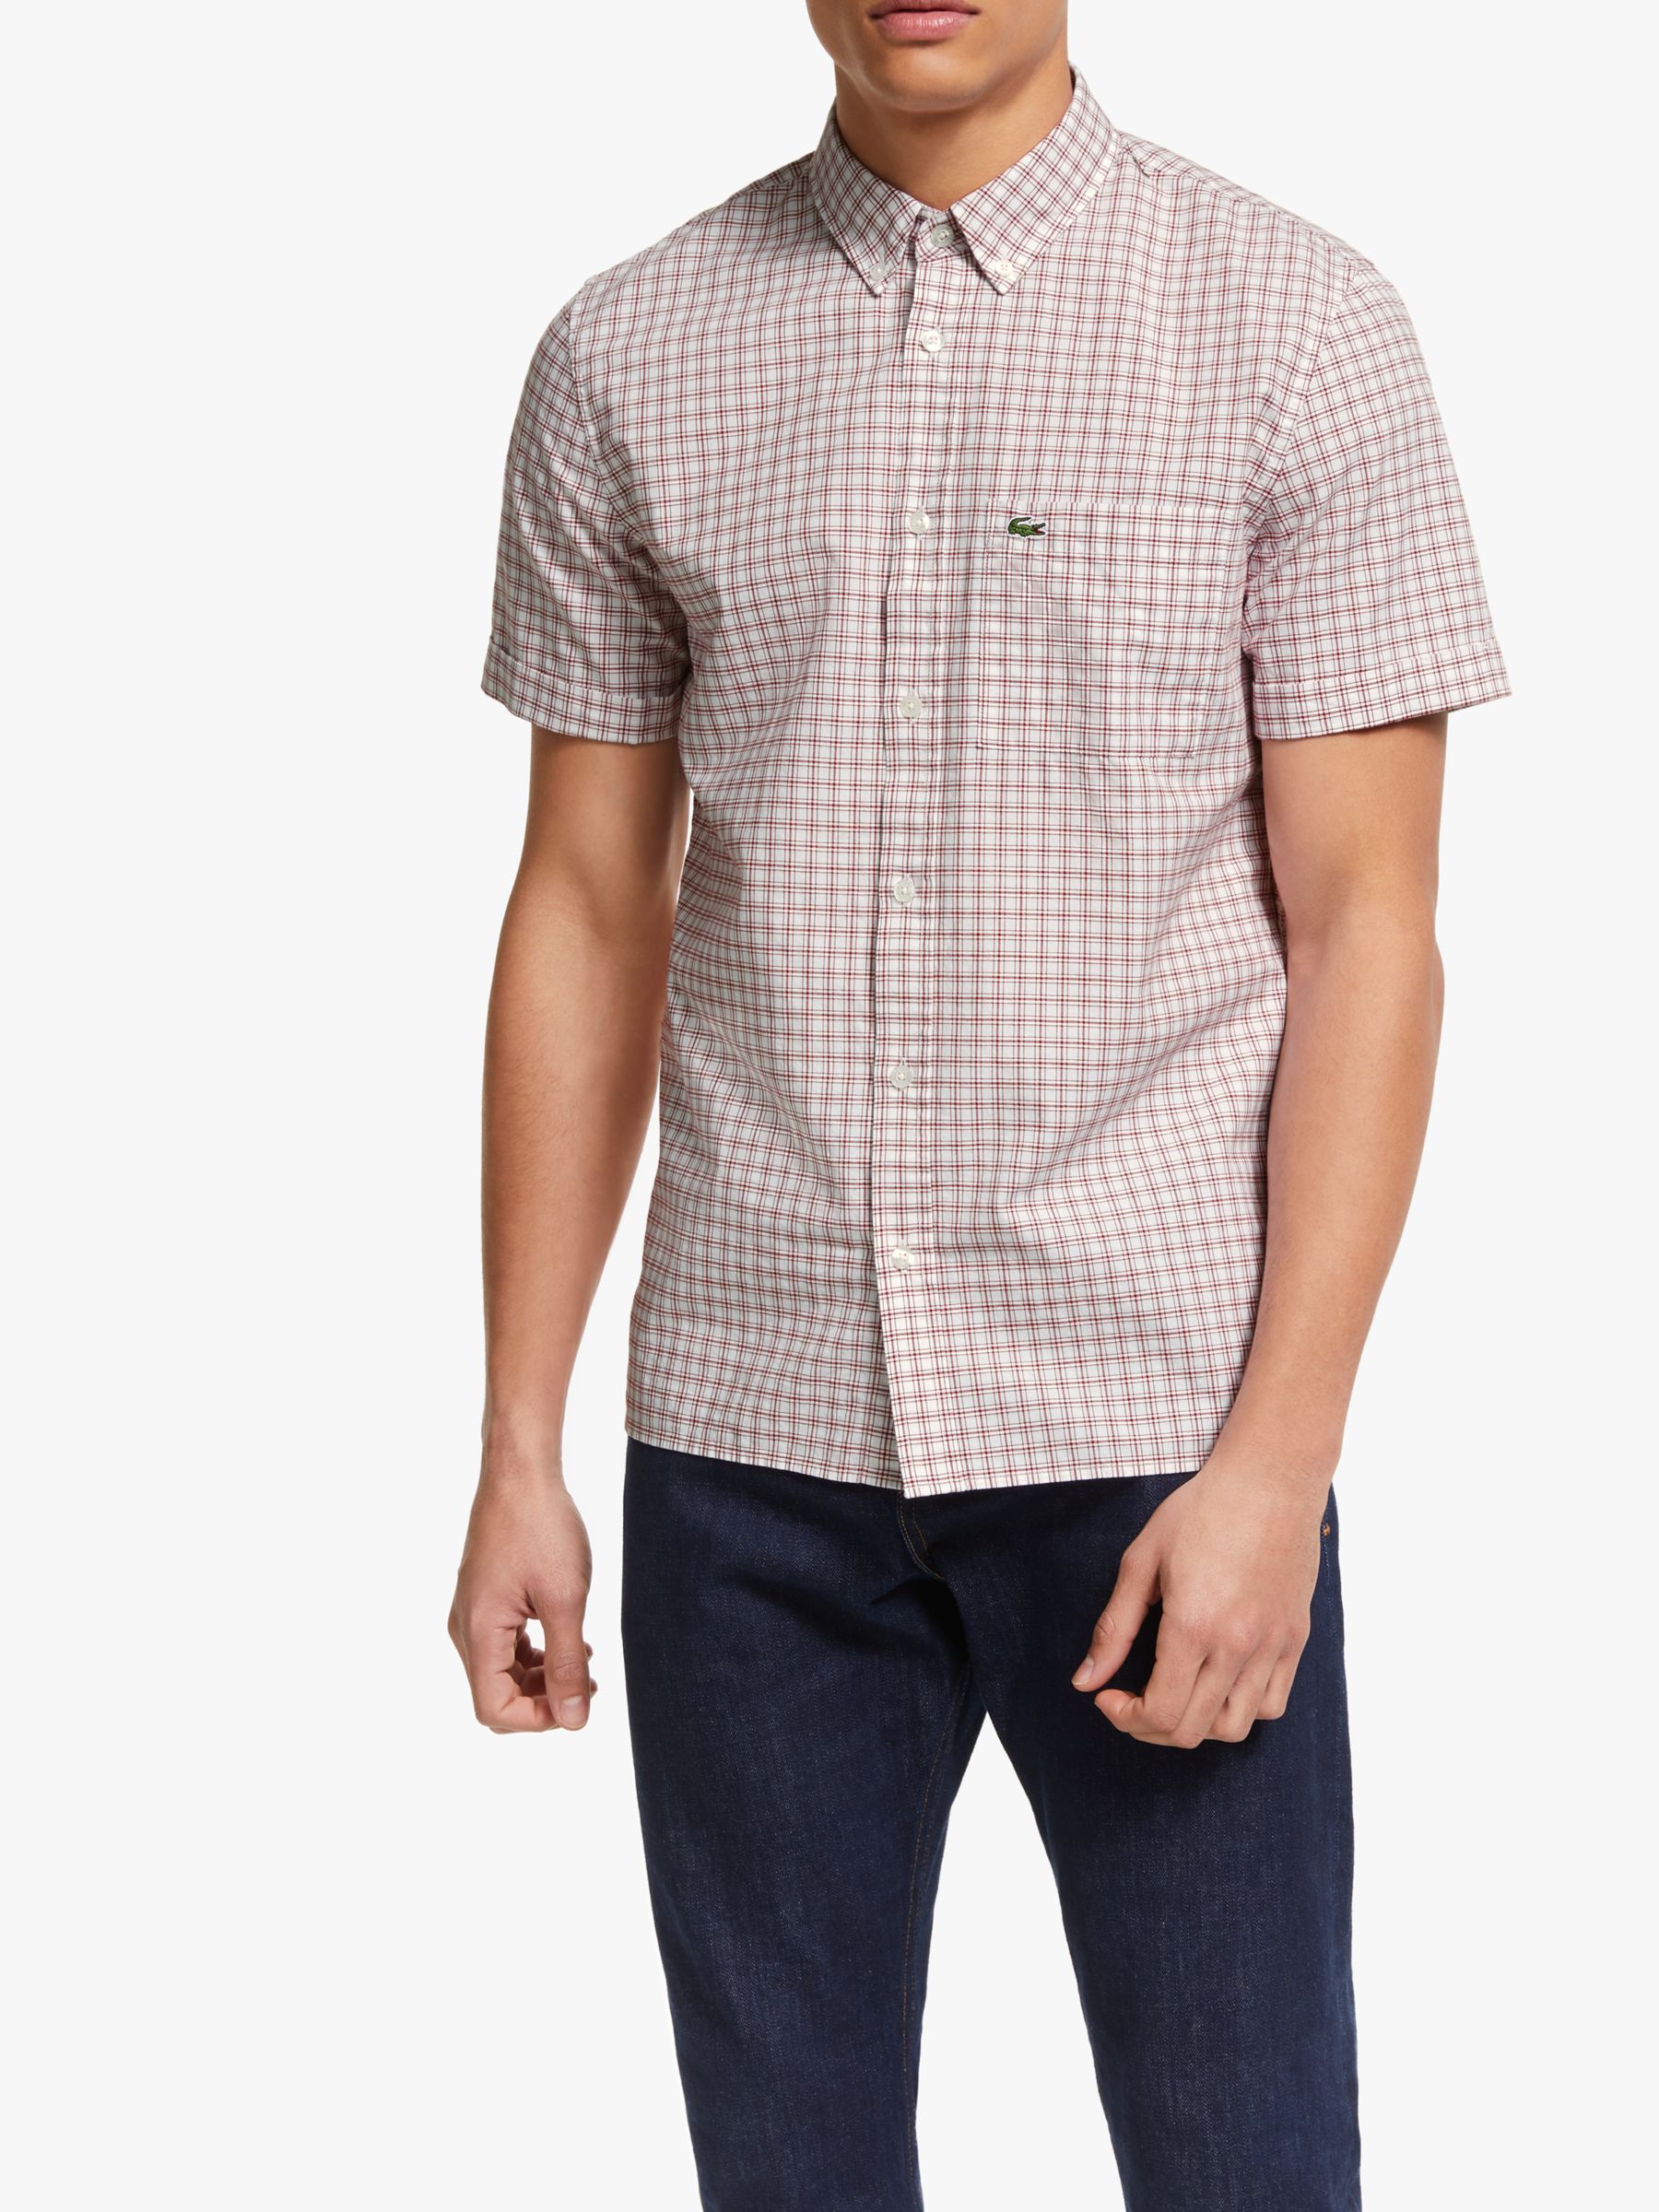 lacoste red check shirt